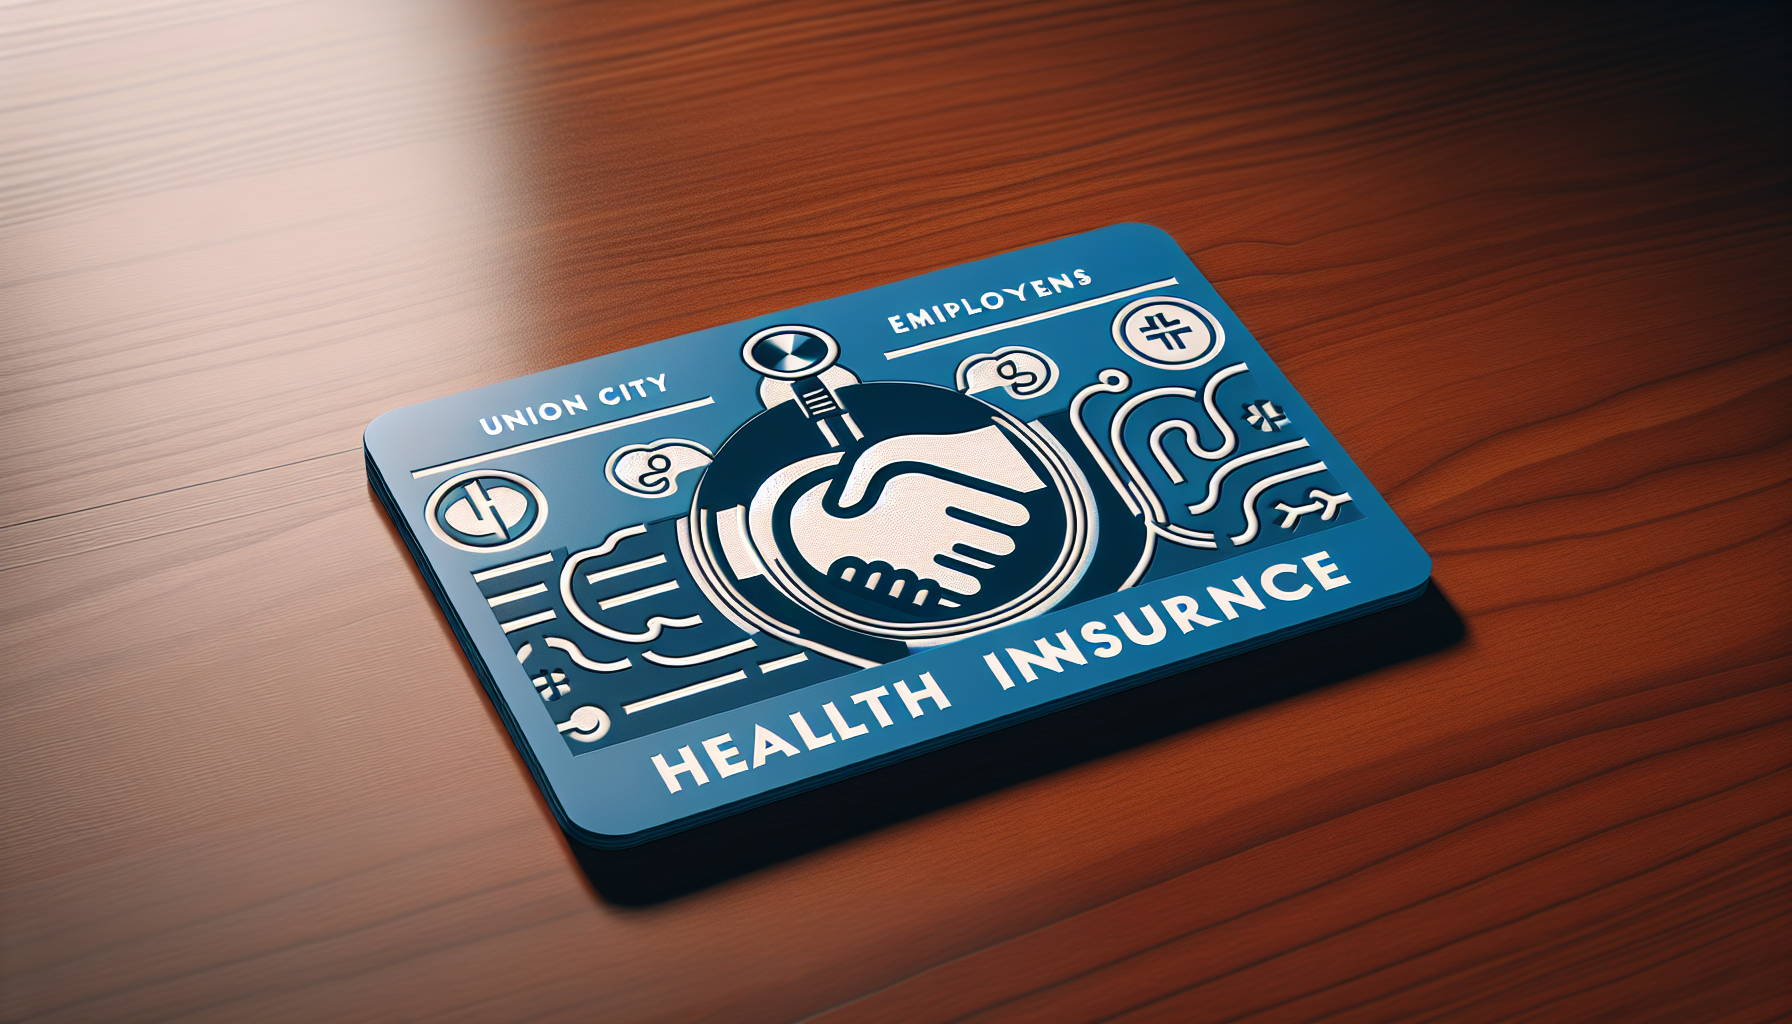 A healthcare insurance card with the text 'Health Insurance' for Union City employees